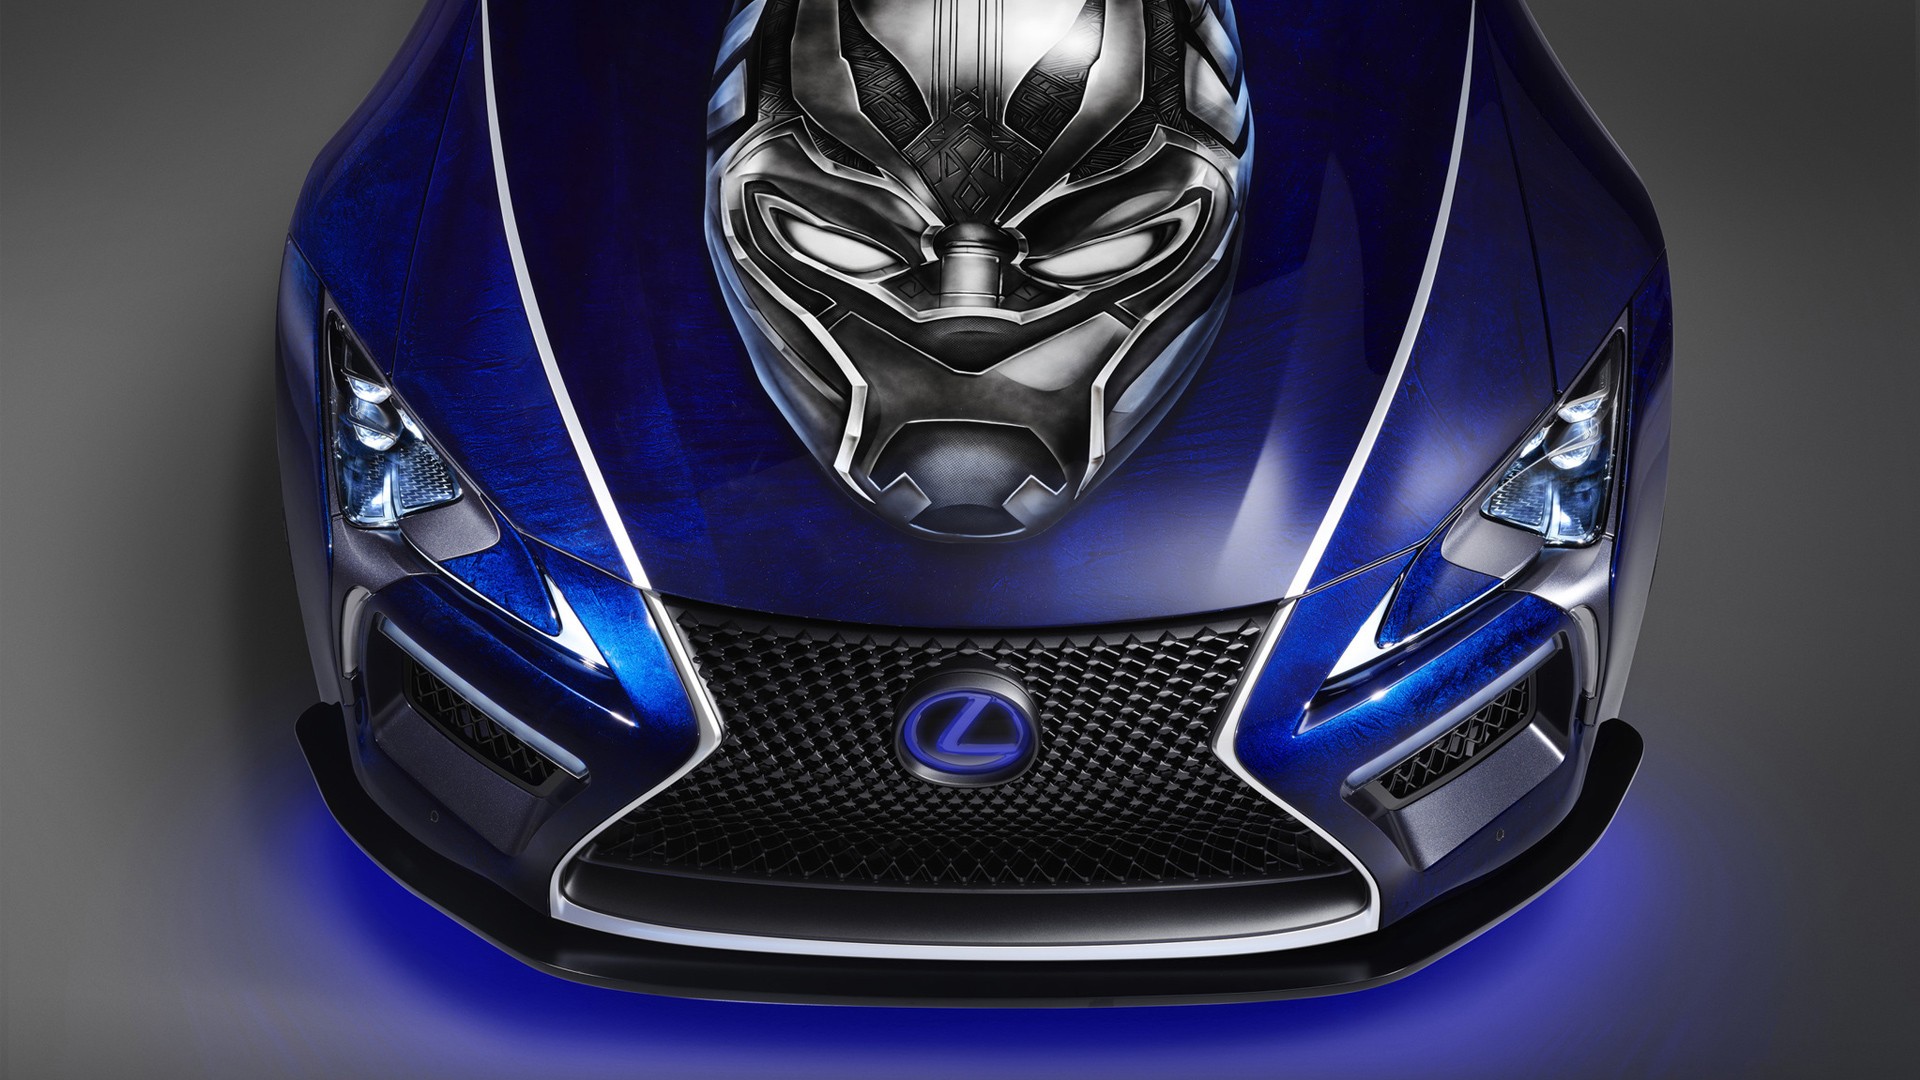 Lexus Lc Black Panther Special Edition - 2018 Lc Inspiration Series - HD Wallpaper 